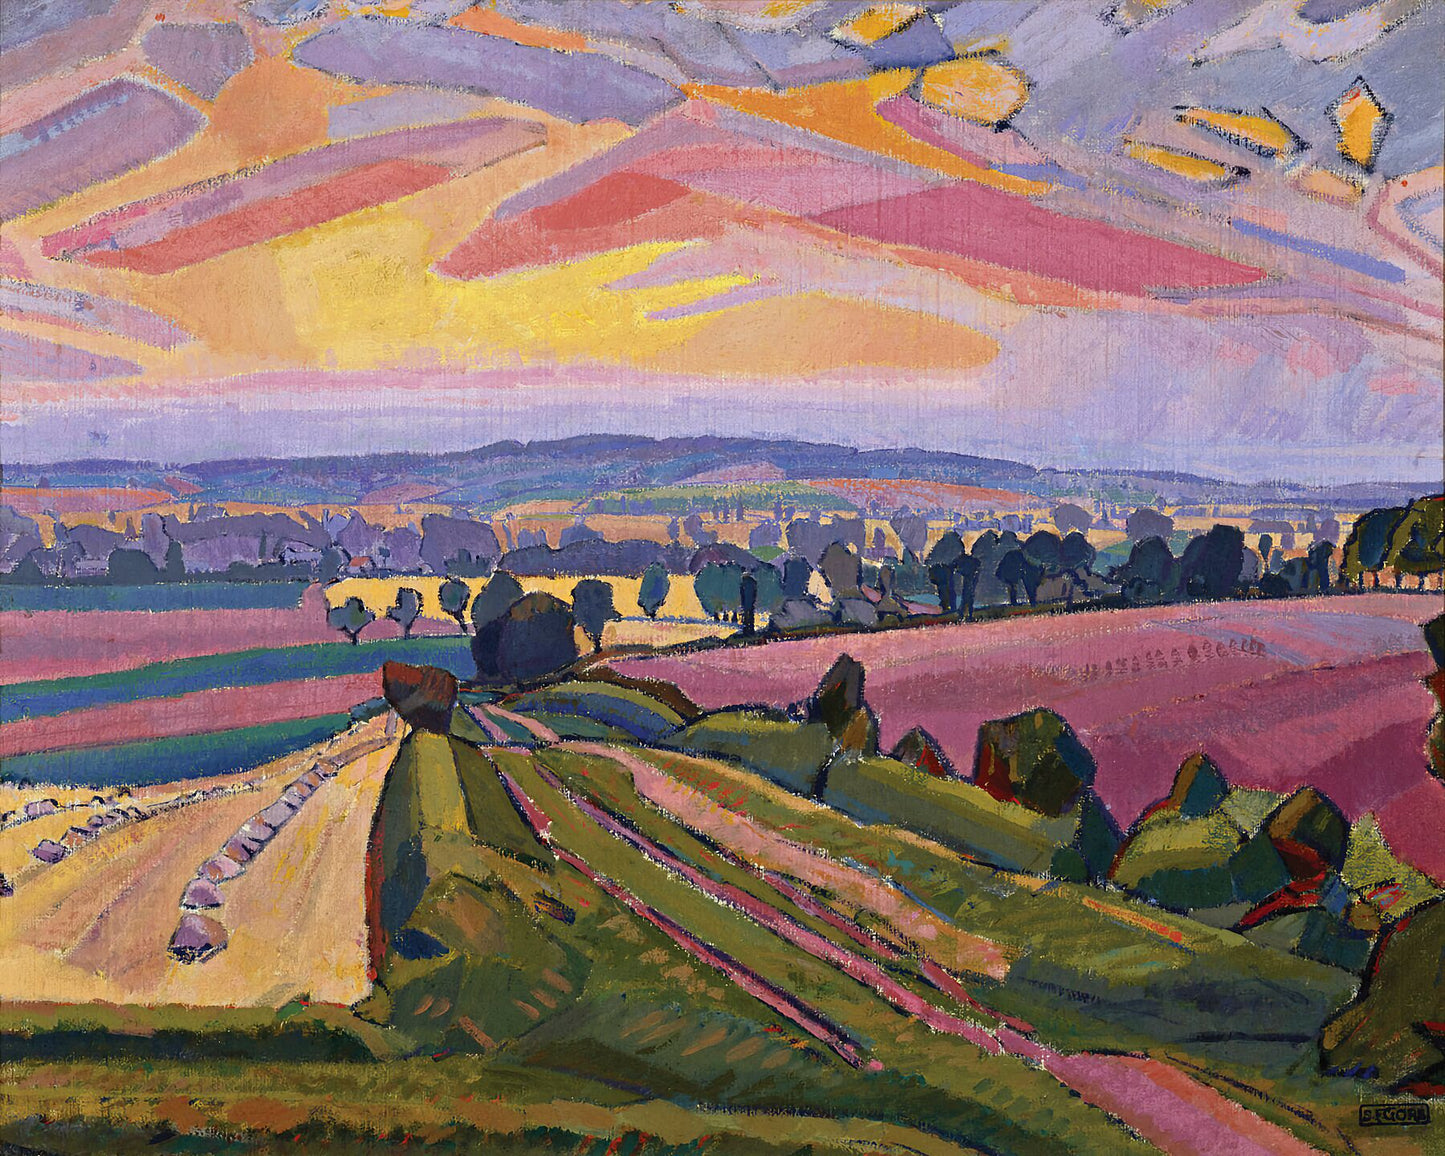 The Icknield Way by Spencer Gore - 1912